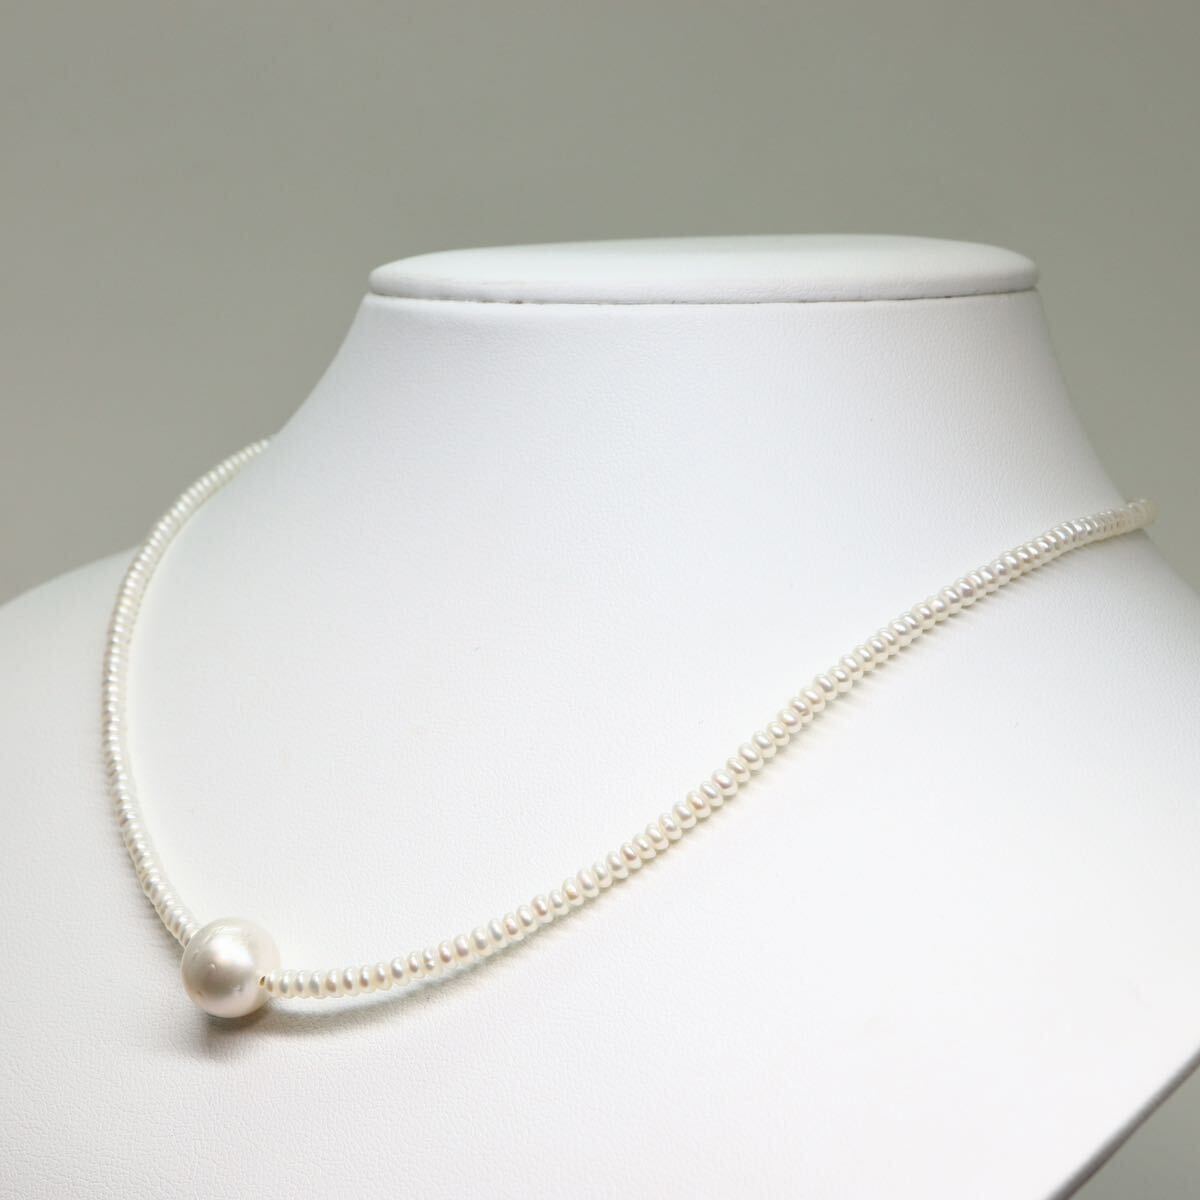 《K18 本真珠ネックレス》M 7.5g 約43cm pearl necklace ジュエリー jewelry DC0/DD0